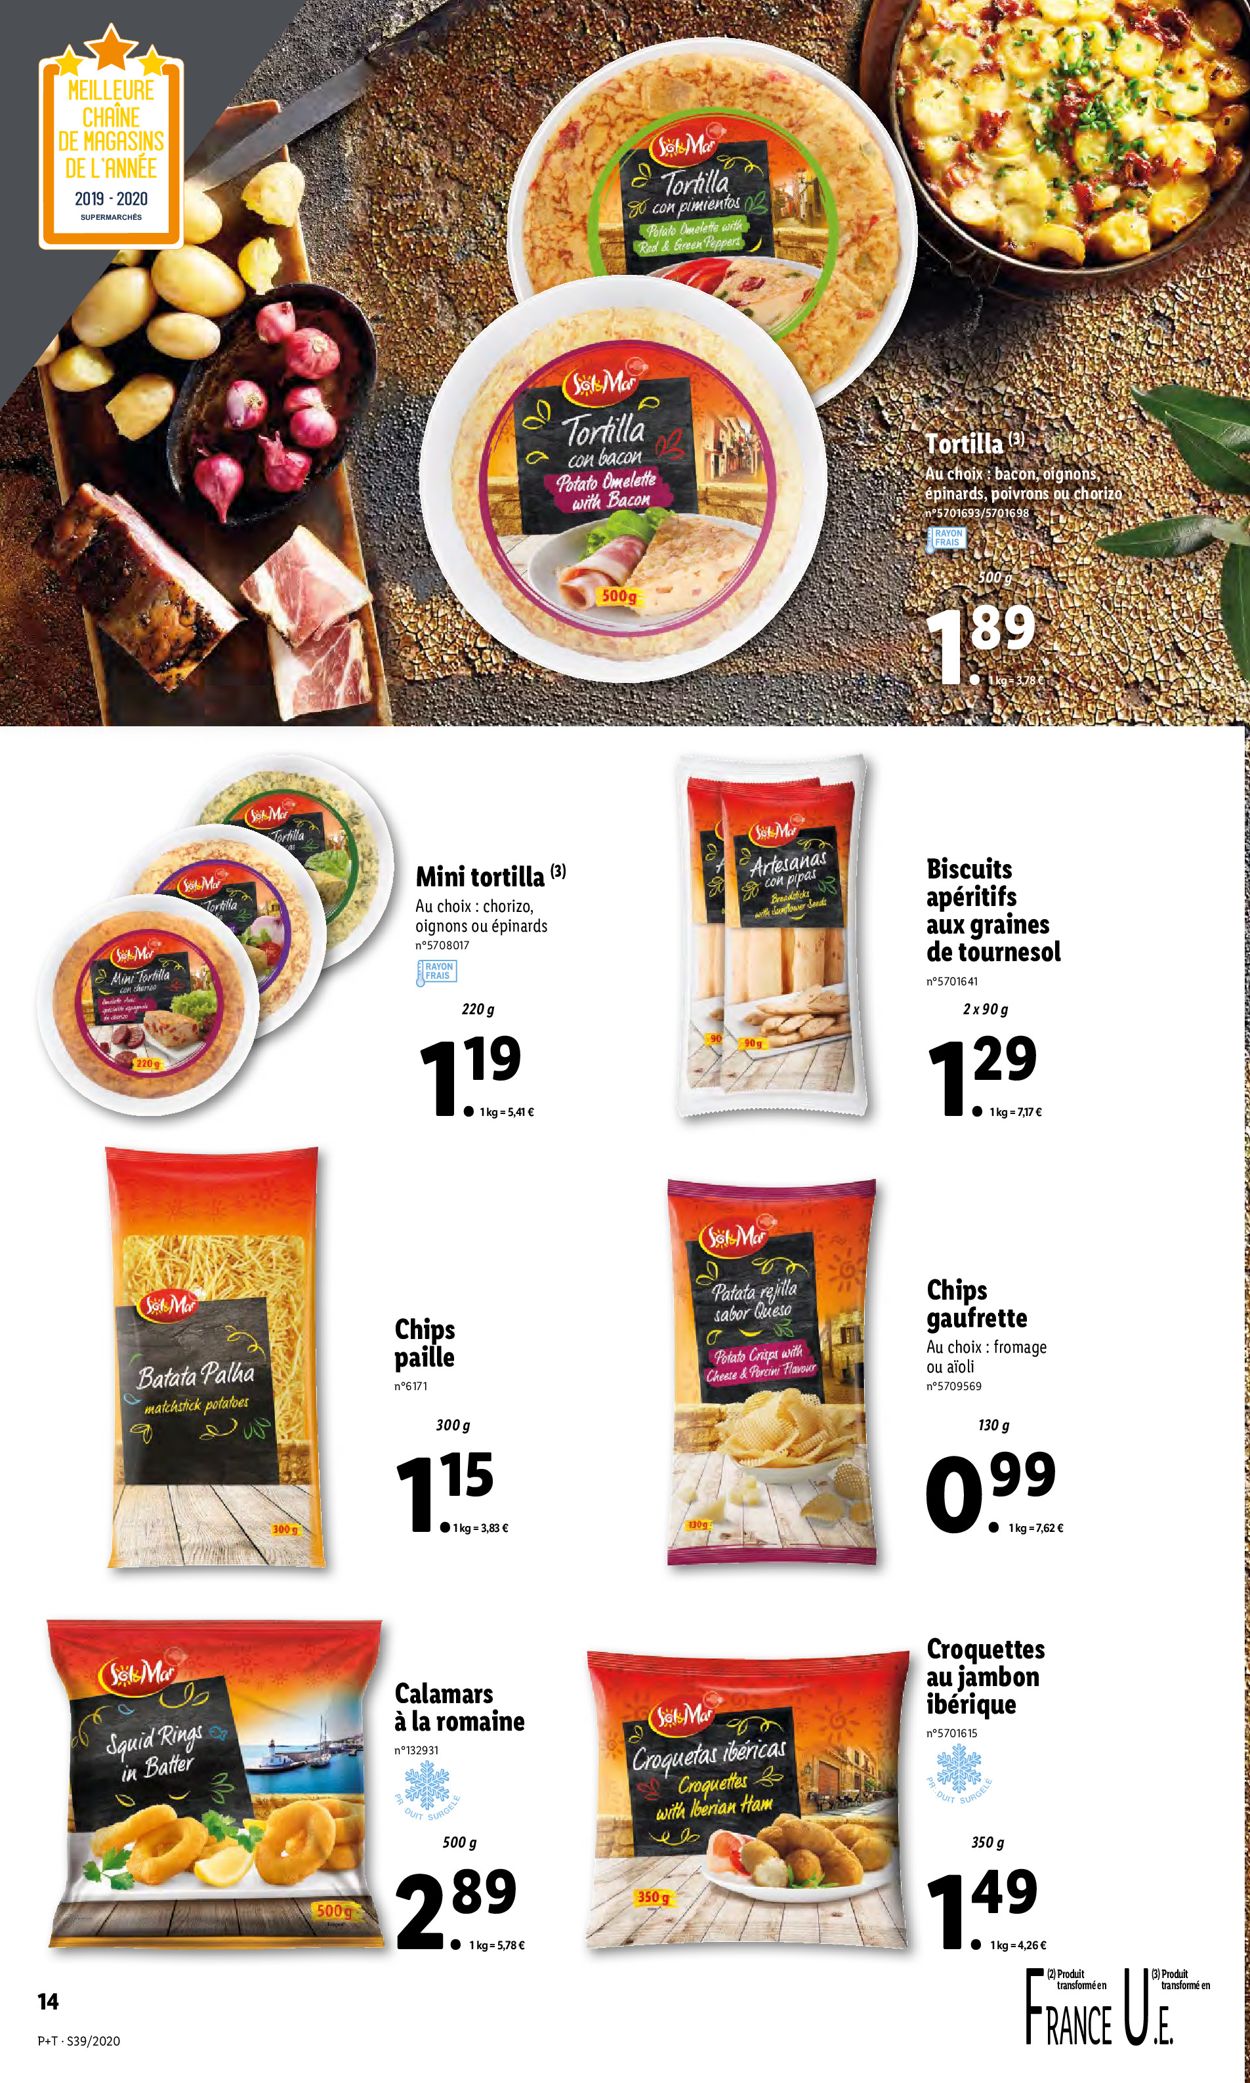 Lidl Catalogue - 23.09-29.09.2020 (Page 14)